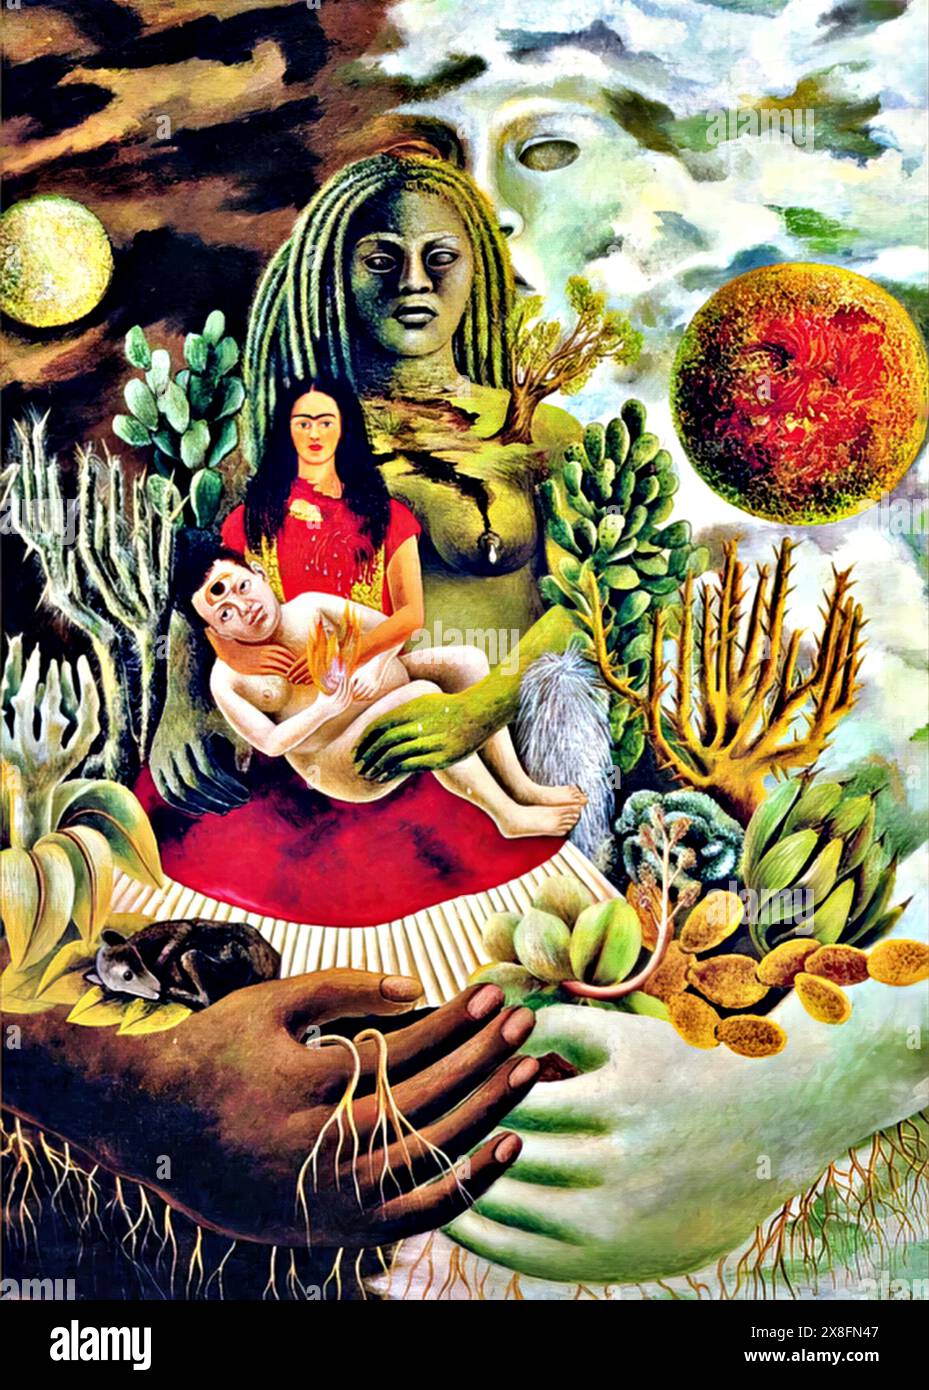 The Love Embrace of the Universe, the Earth (Mexico), Myself, Diego and Seor Xlotl, 1949 (Painting) by Artist Kahlo, Frida (1907-54) Mexican. Mexi Stock Vector